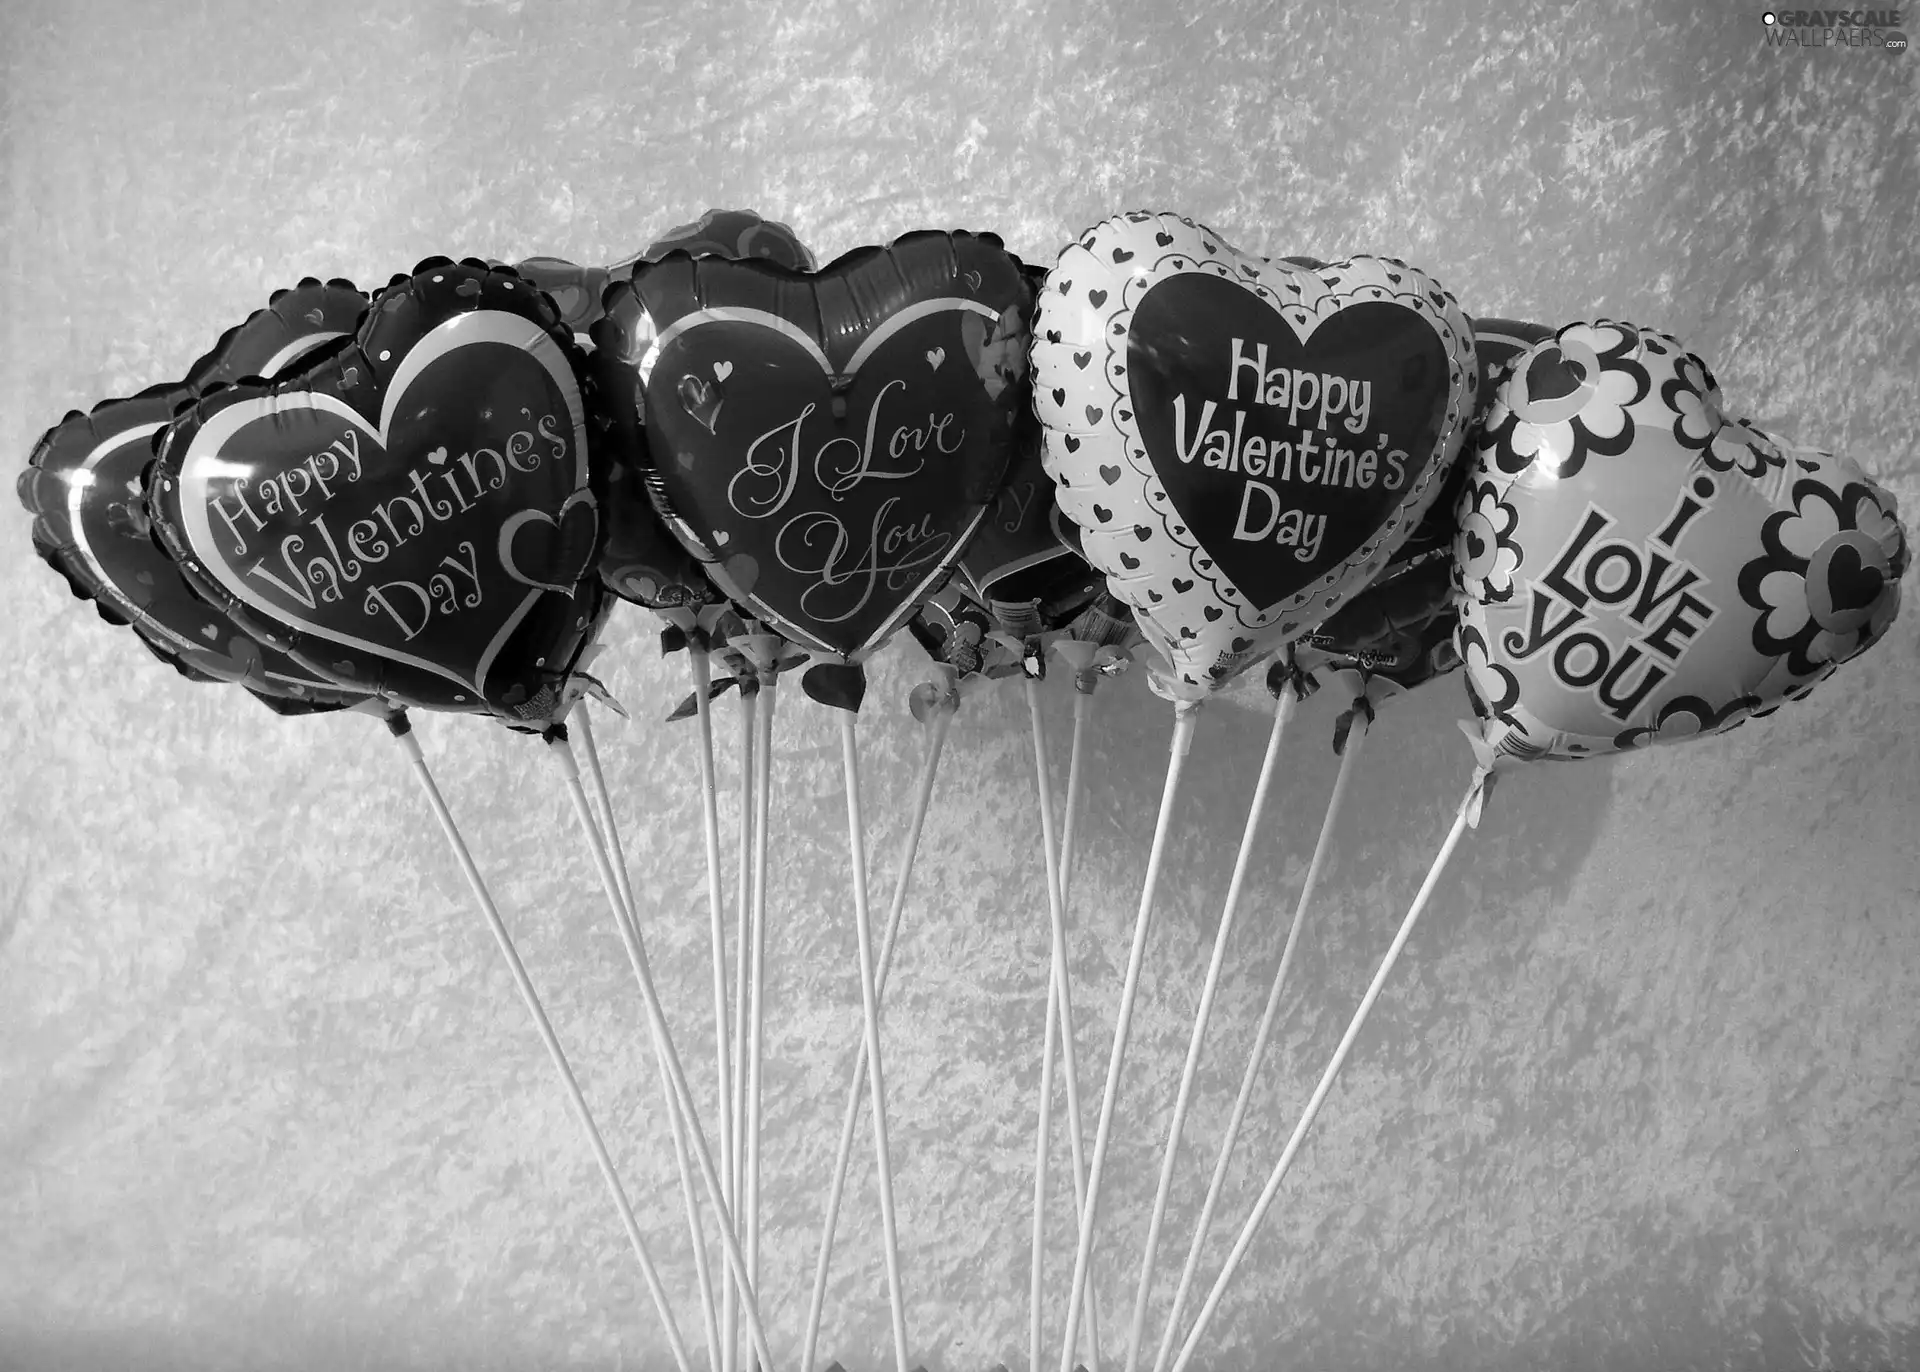 color, hearts, love, balloons